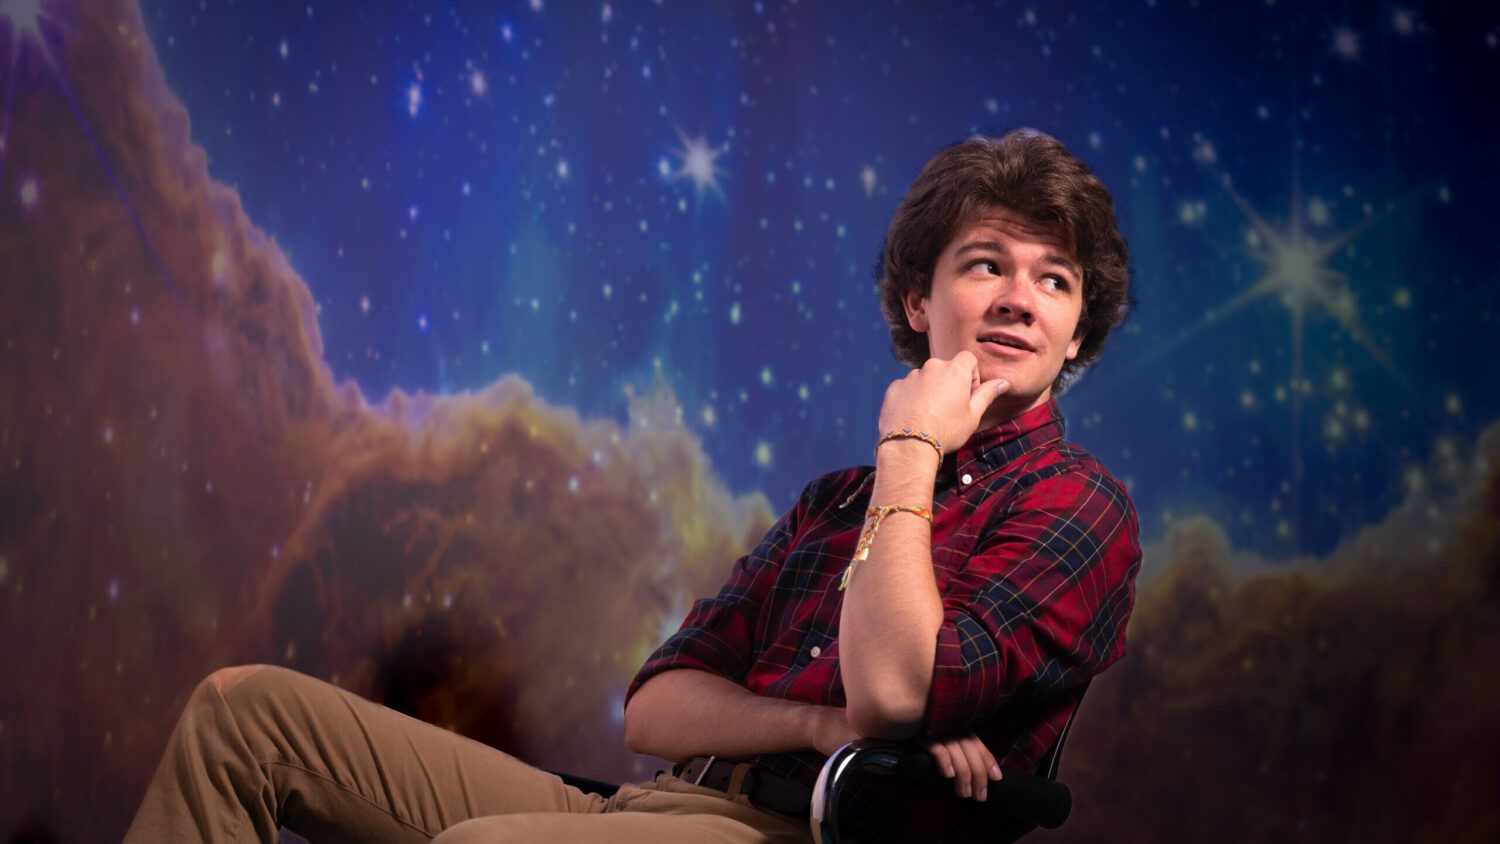 Kevin Cabral sits in a chair, in front of an image from space